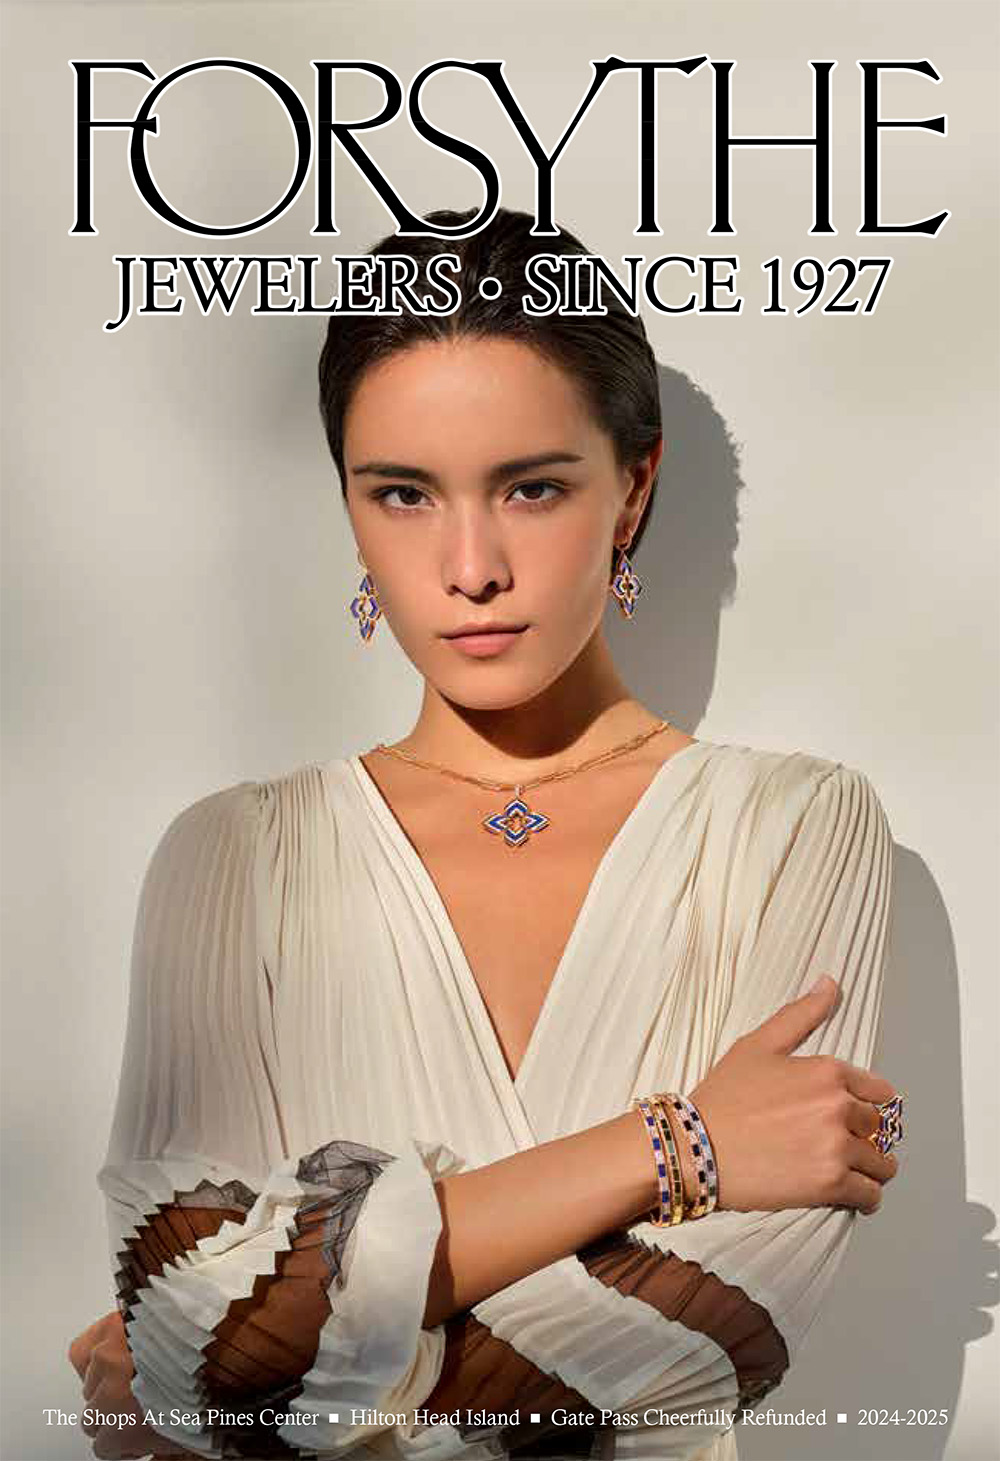 Cover of the Forsythe Jewelers Magazine 2024